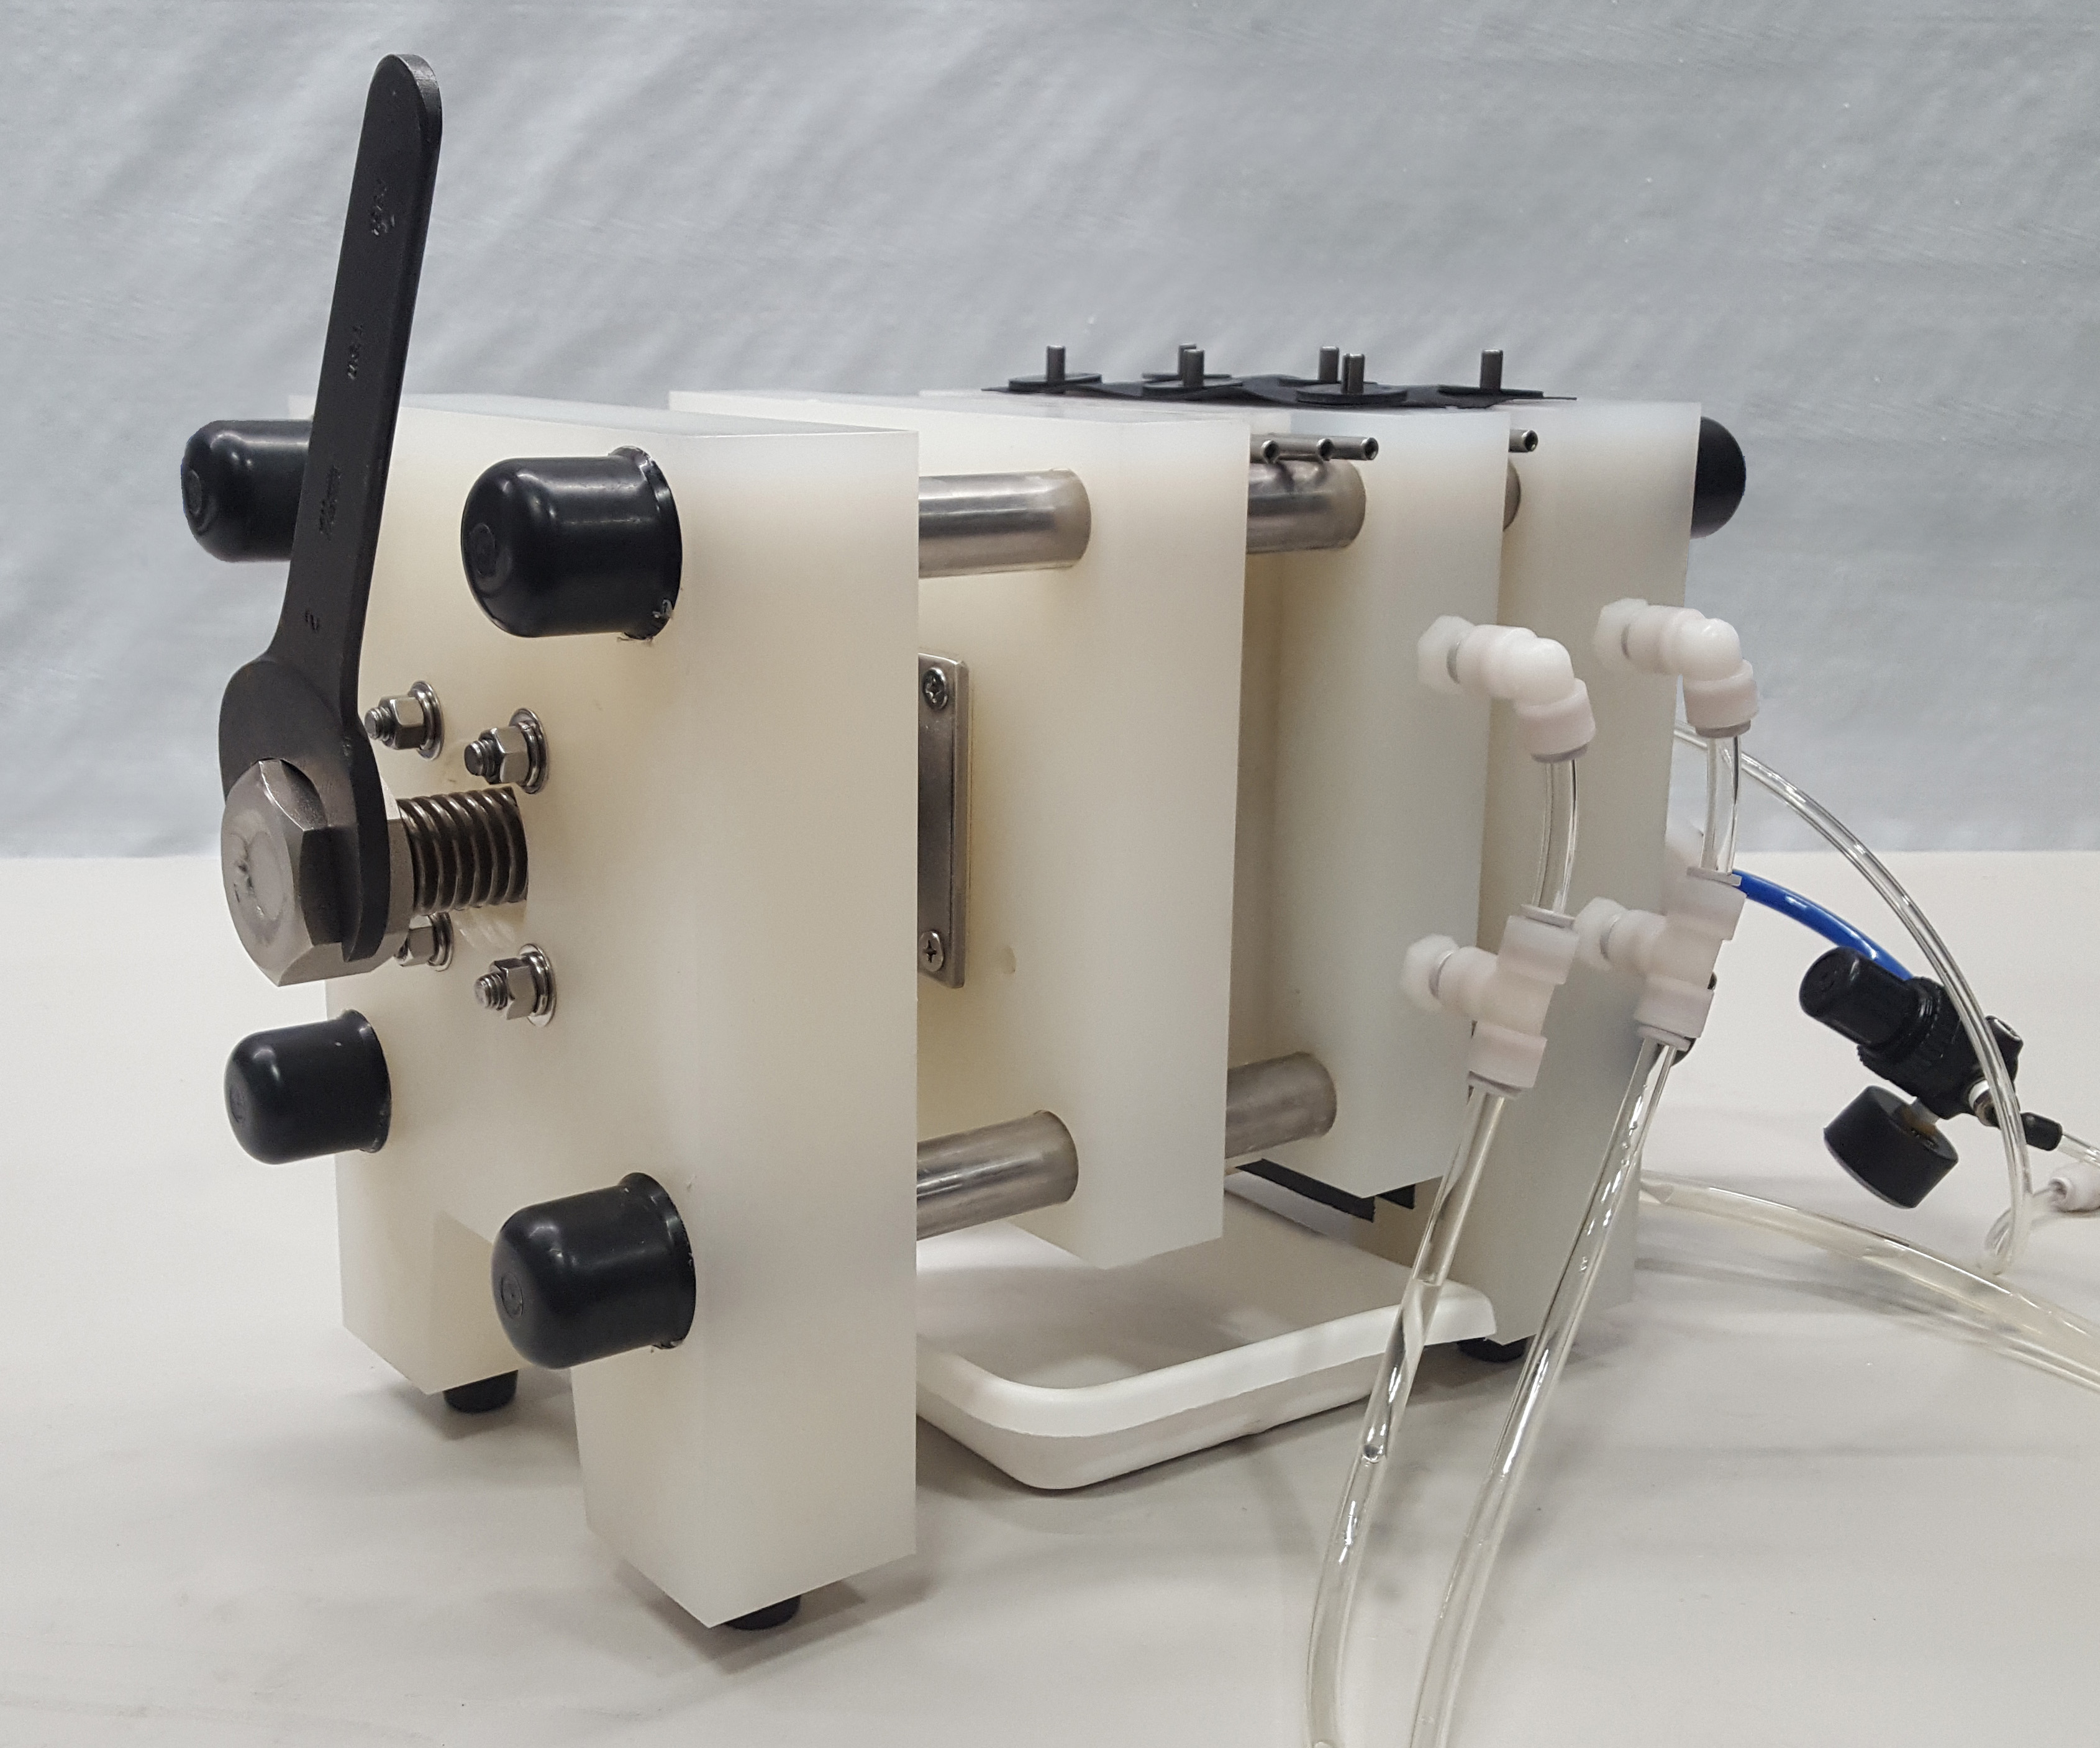 The MicroPress comes complete with a feed pump and a high-pressure manual air pump for the membrane squeeze.